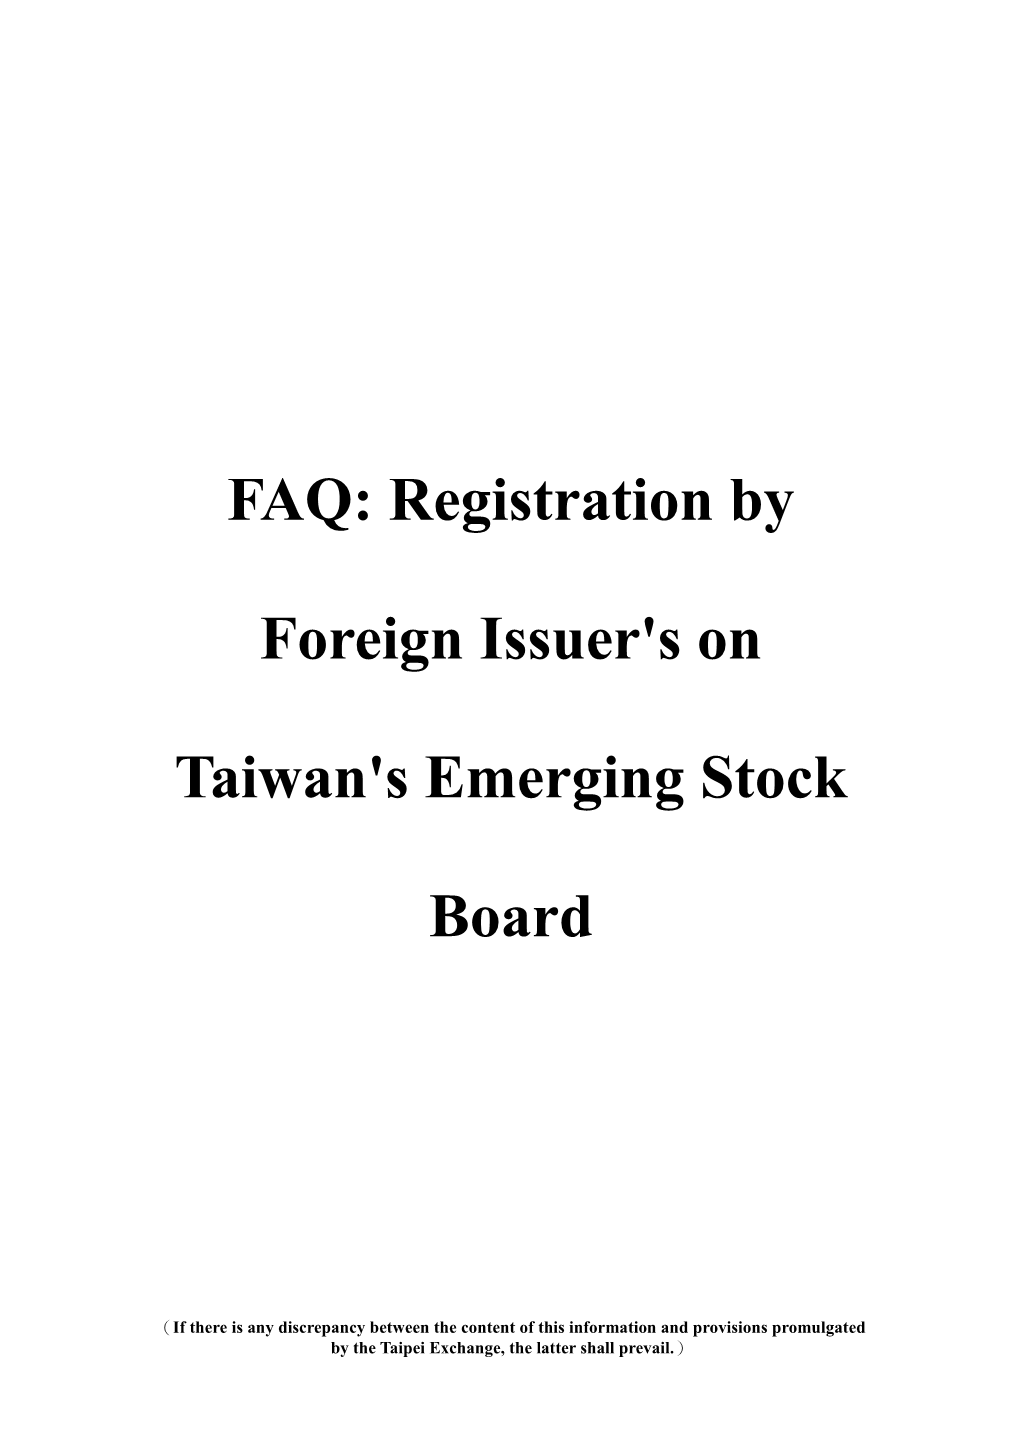 FAQ: Registration by Foreign Issuer's on Taiwan's Emerging Stock Board